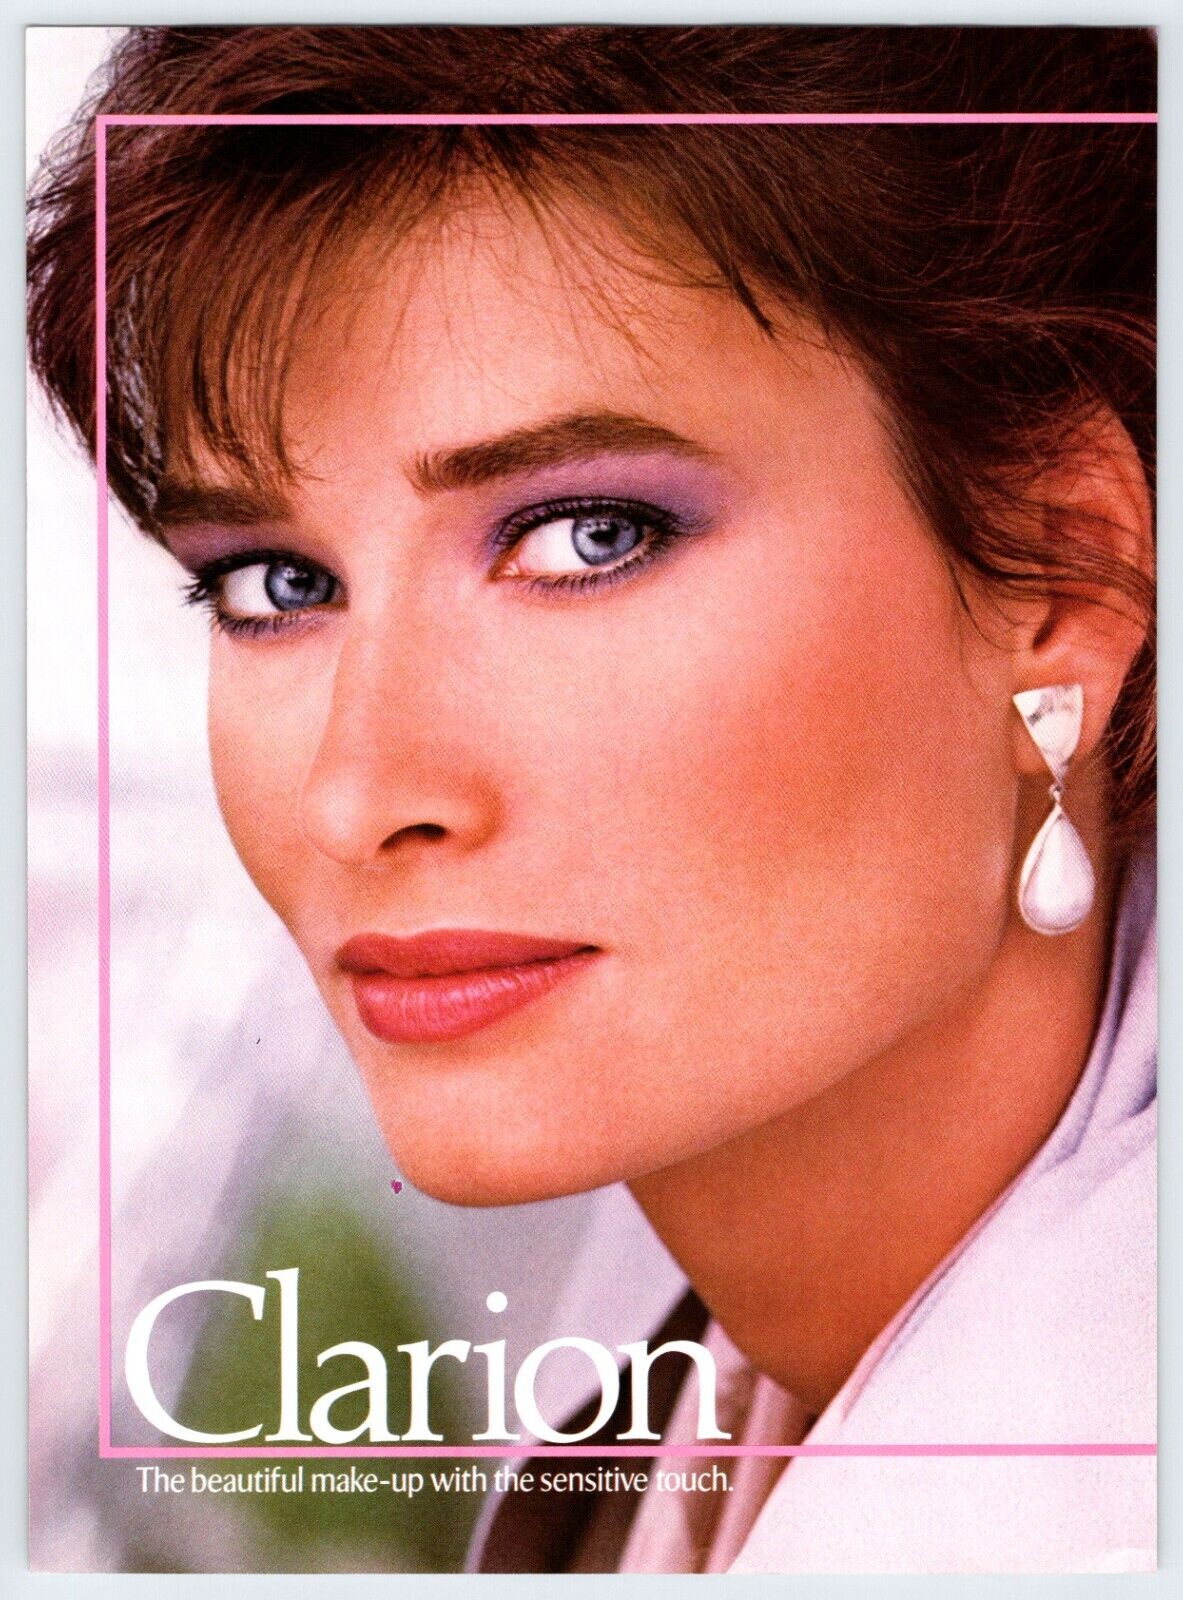 1987 PRETTY WOMAN CLARION MAKE-UP Vintage 8\